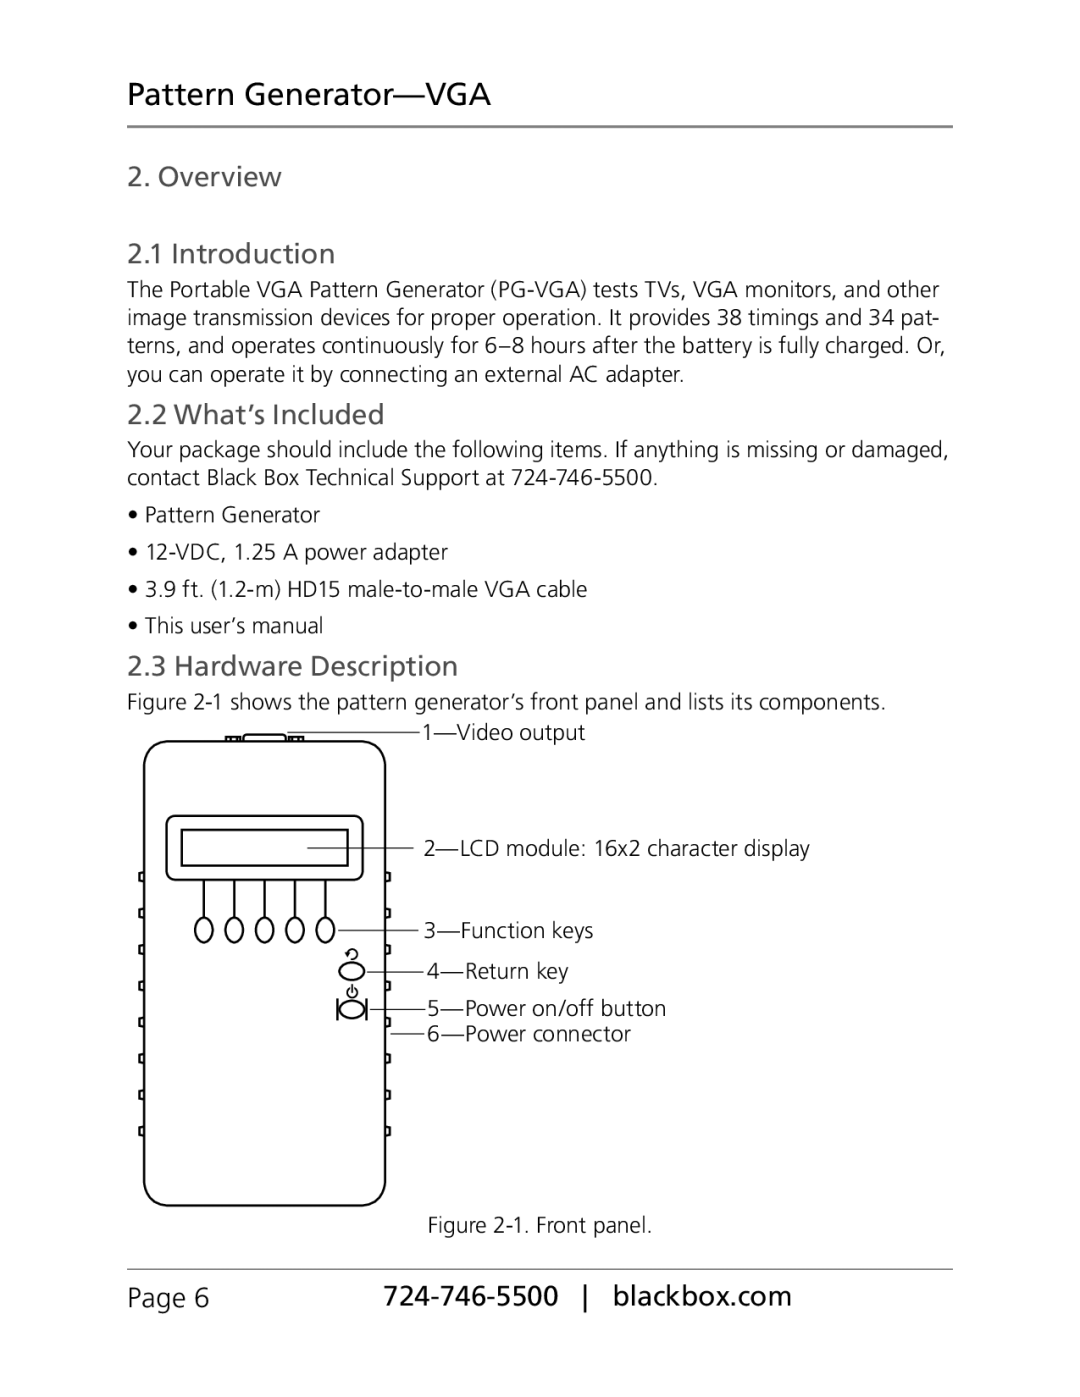 Black Box PG-VGA manual Overview 2.1 Introduction, What’s Included, Hardware Description, Pattern Generator-VGA, Page 